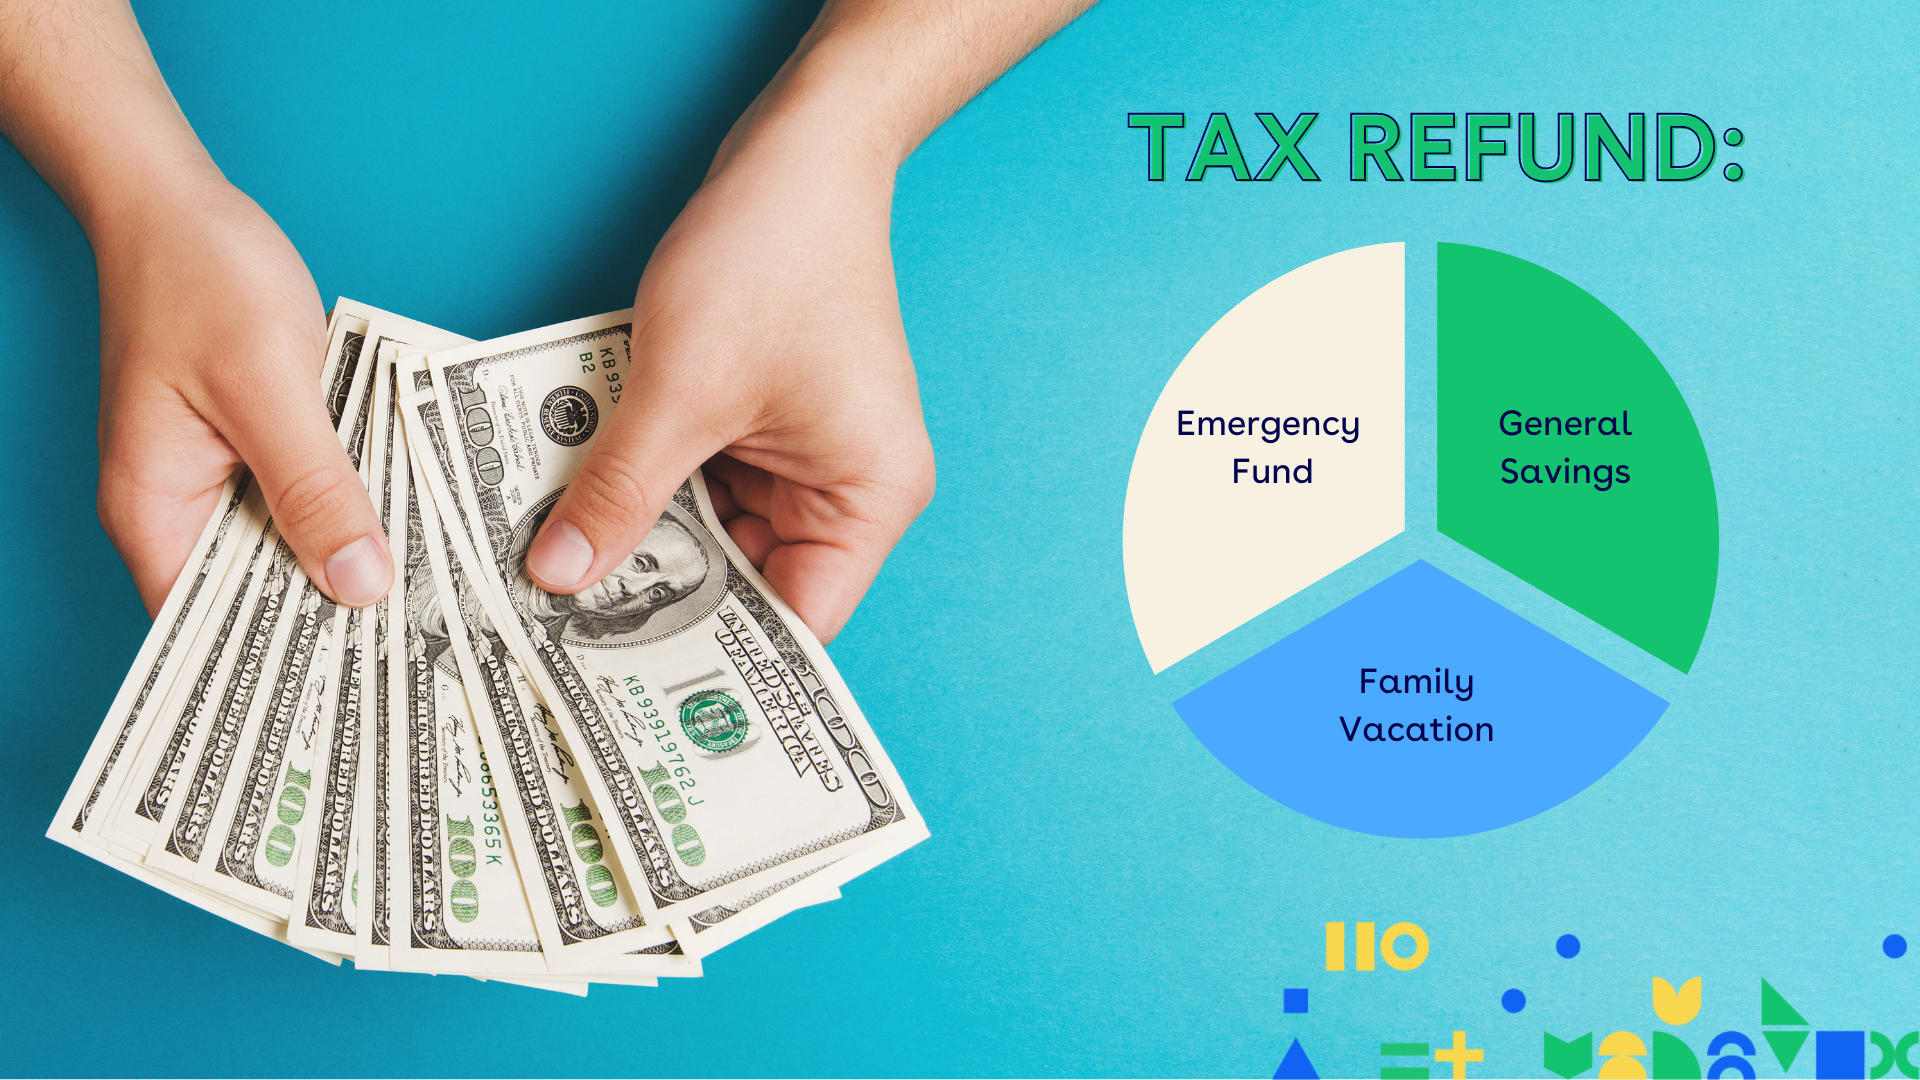 Image of two hands holding about $1,000 in $100 dollar bills and a pie chart showing a breakdown of saving a tax refund three ways across an emergency fund, general savings, and family vacation 